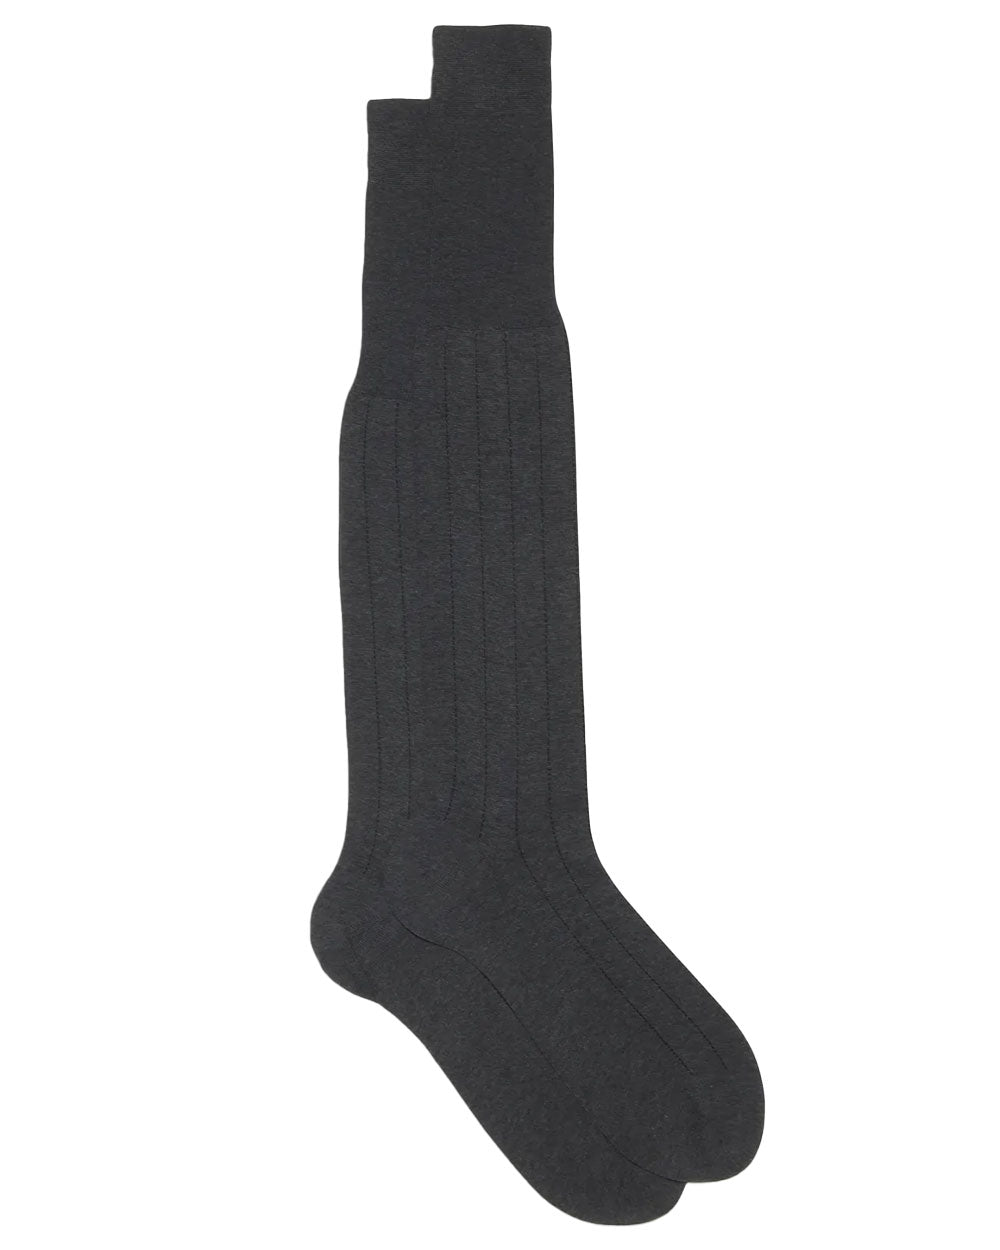 Vertical Striped Over the Calf Socks in Anthrocite